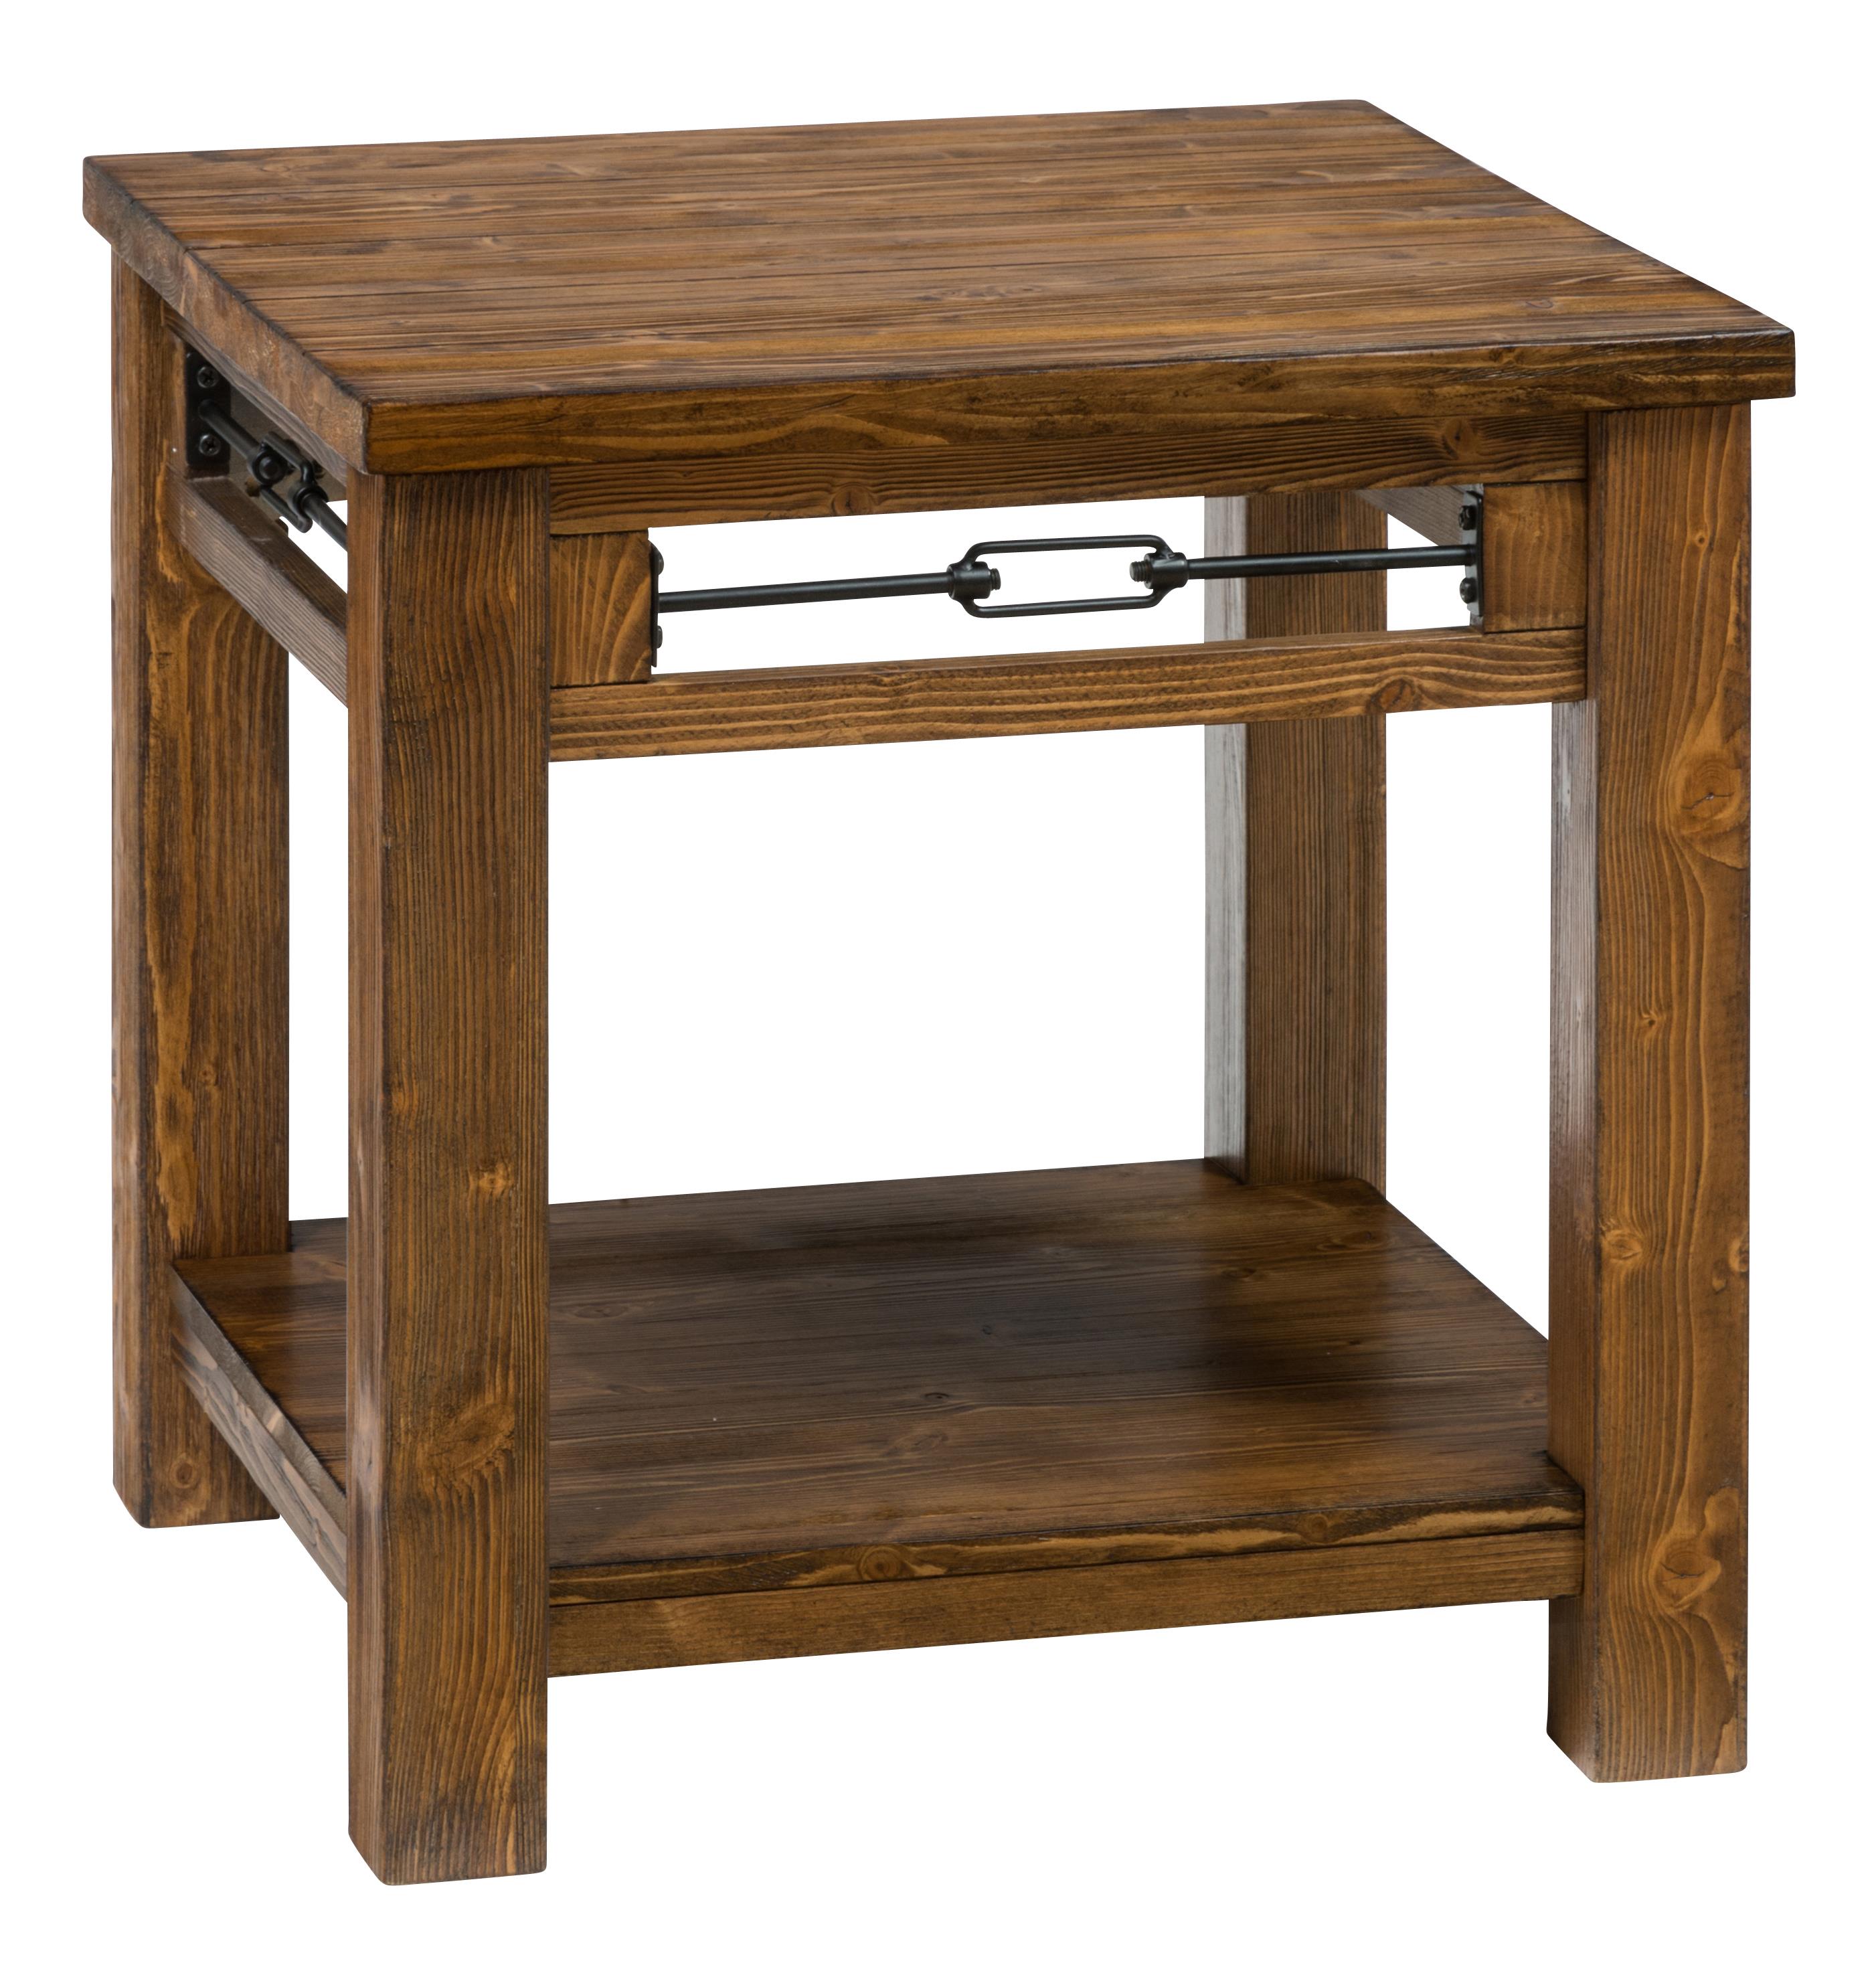 Jofran Furniture San Marcos End Table The Classy Home